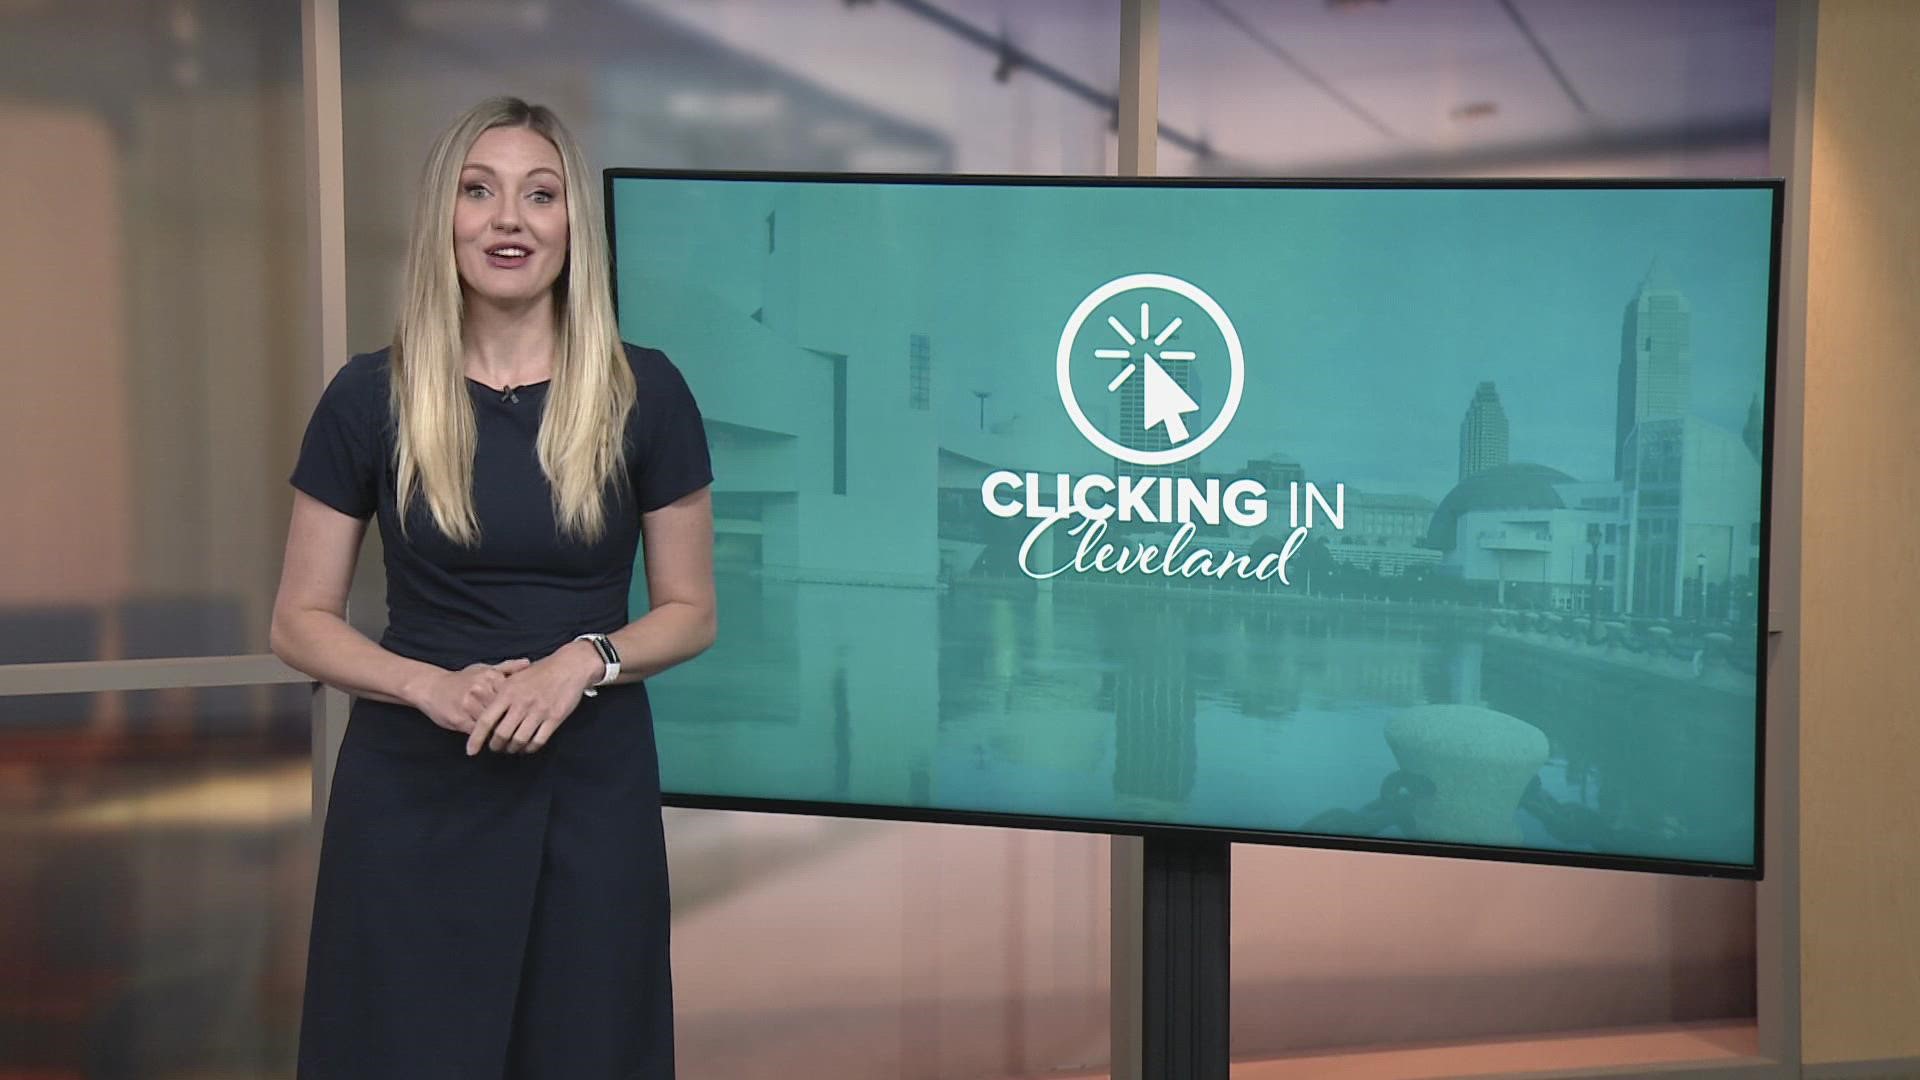 3News Digital Anchor Stephanie Haney breaks down today's trending stories, including the Cavaliers' summer league roster and the newest Powerball jackpot winner.